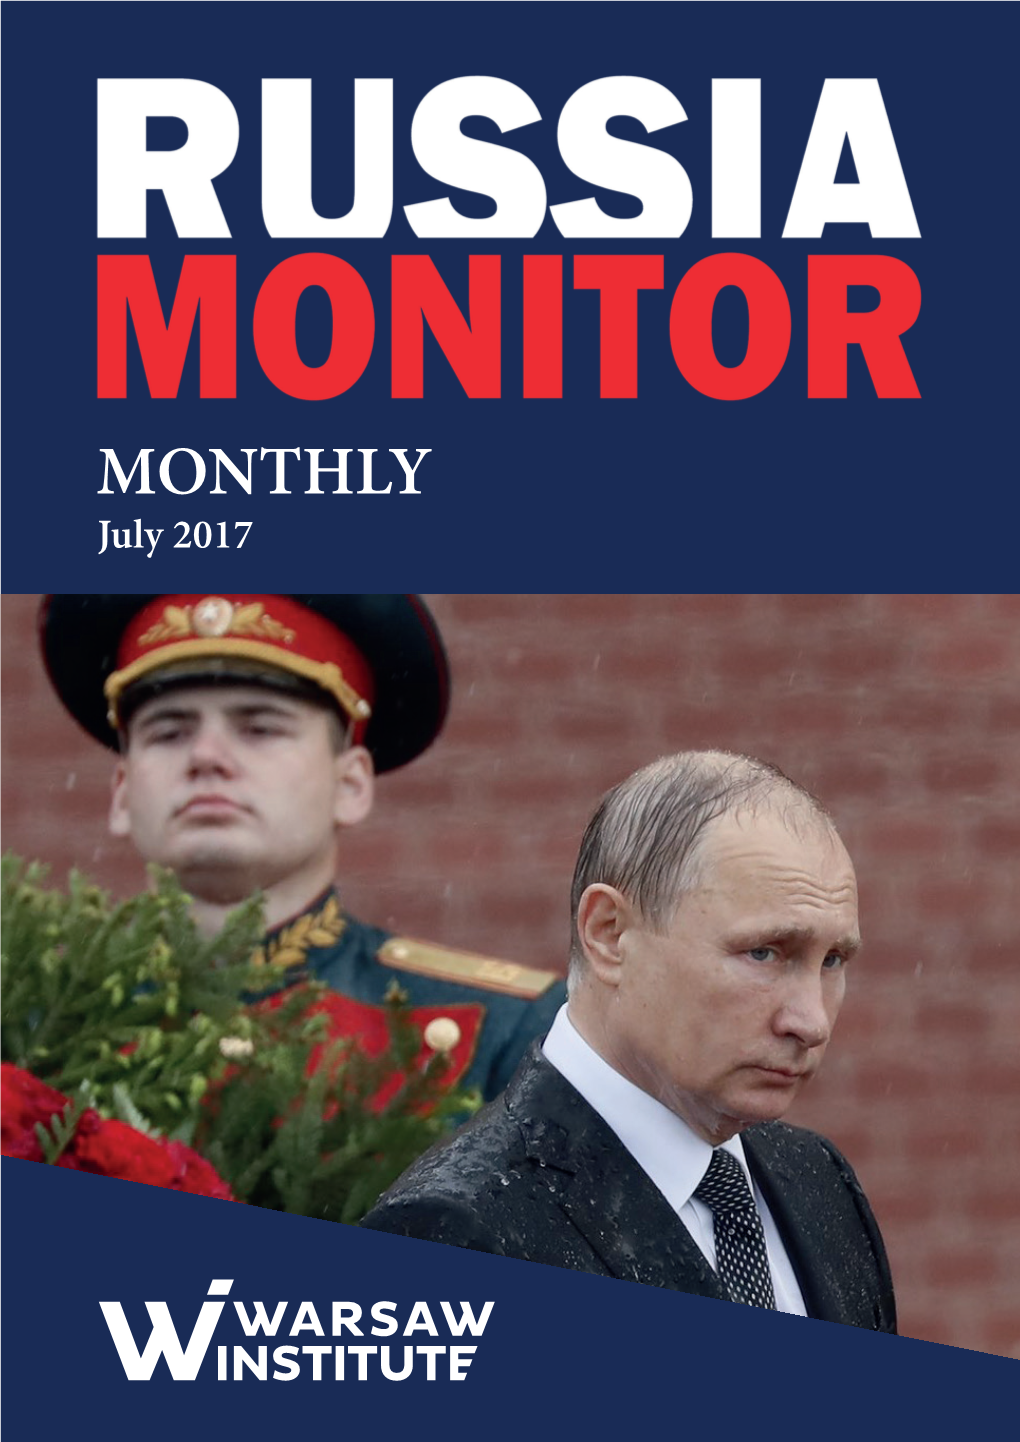 MONTHLY July 2017 CONTENTS